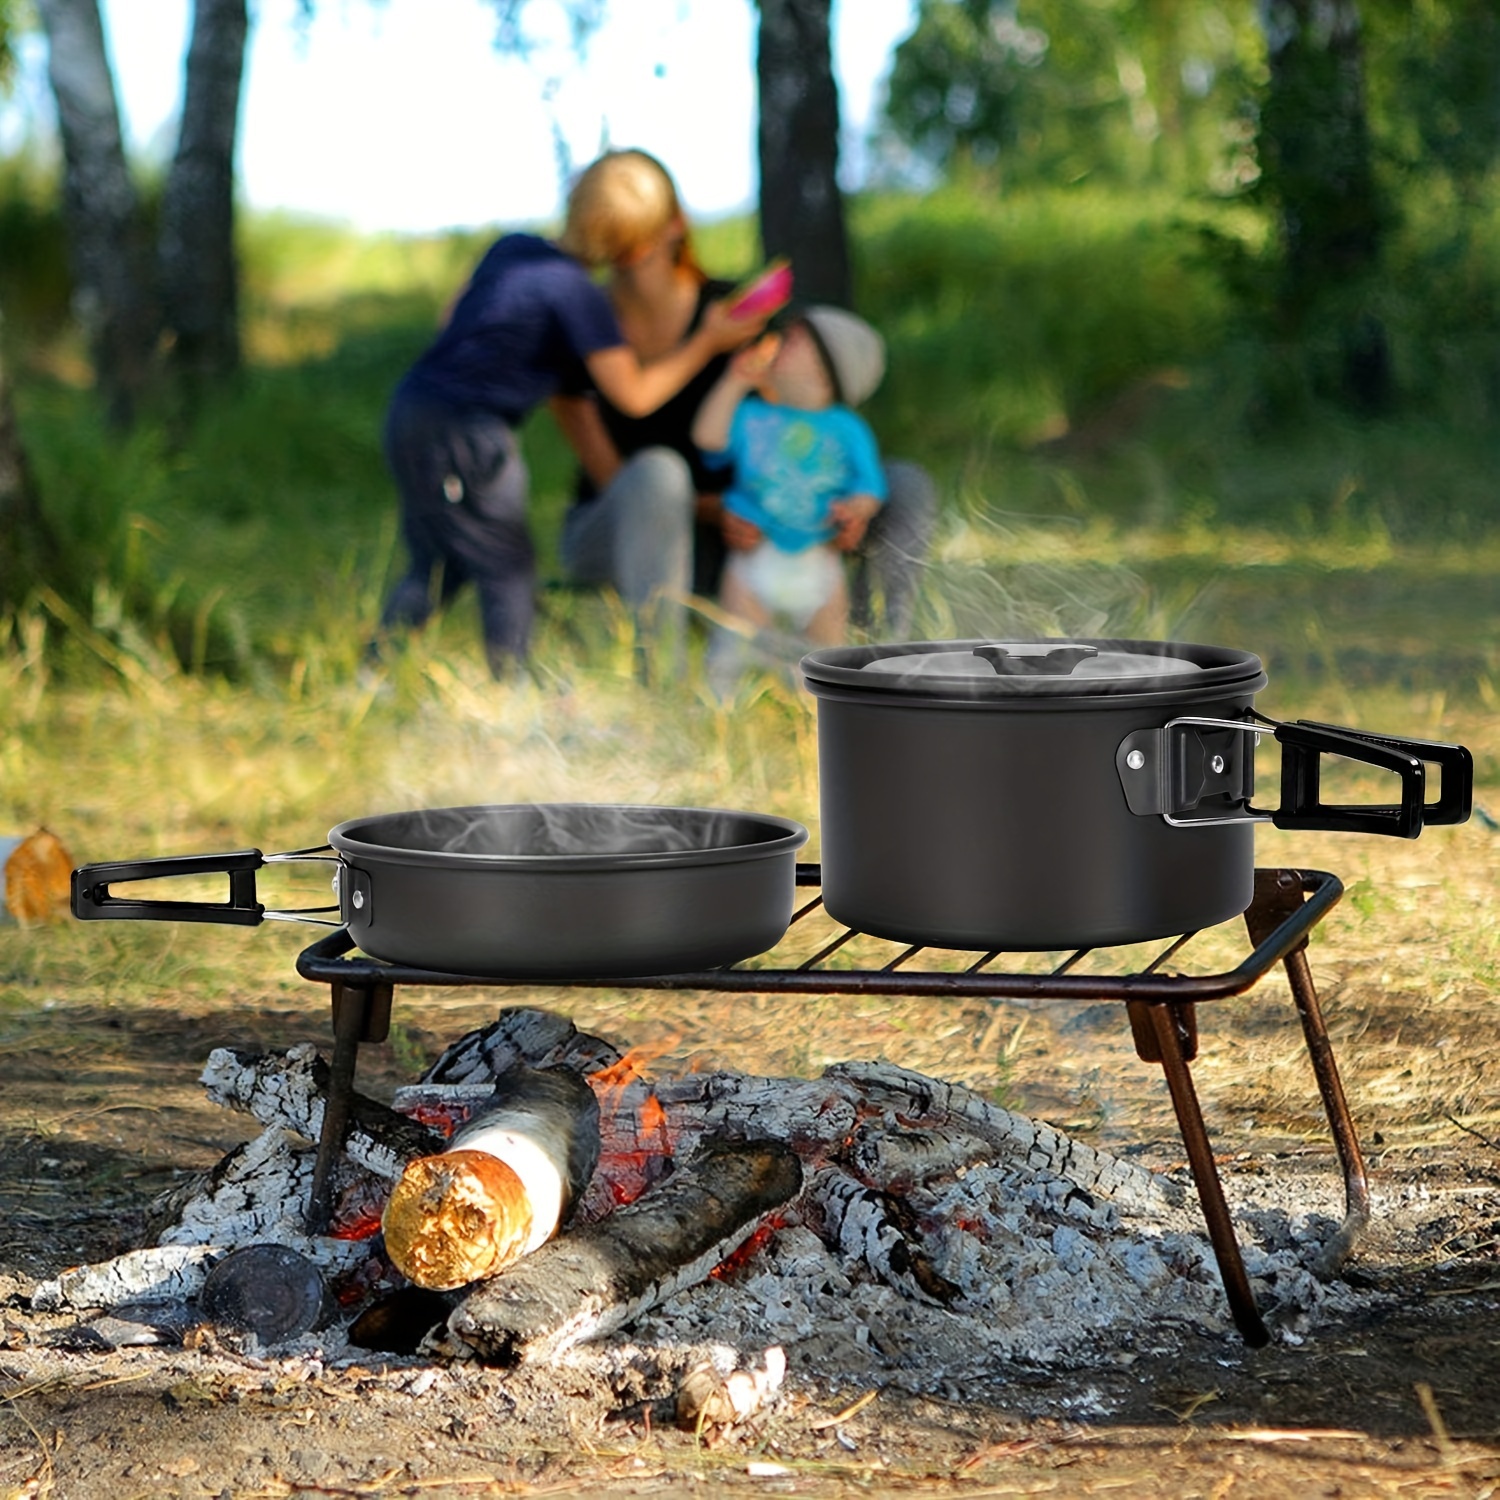 Picnic Cooking Stove Mini Cook Stove For Camping Home Kitchen Supplies For  Picnic Hiking RV Camping Outdoor BBQ And Backpacking - AliExpress